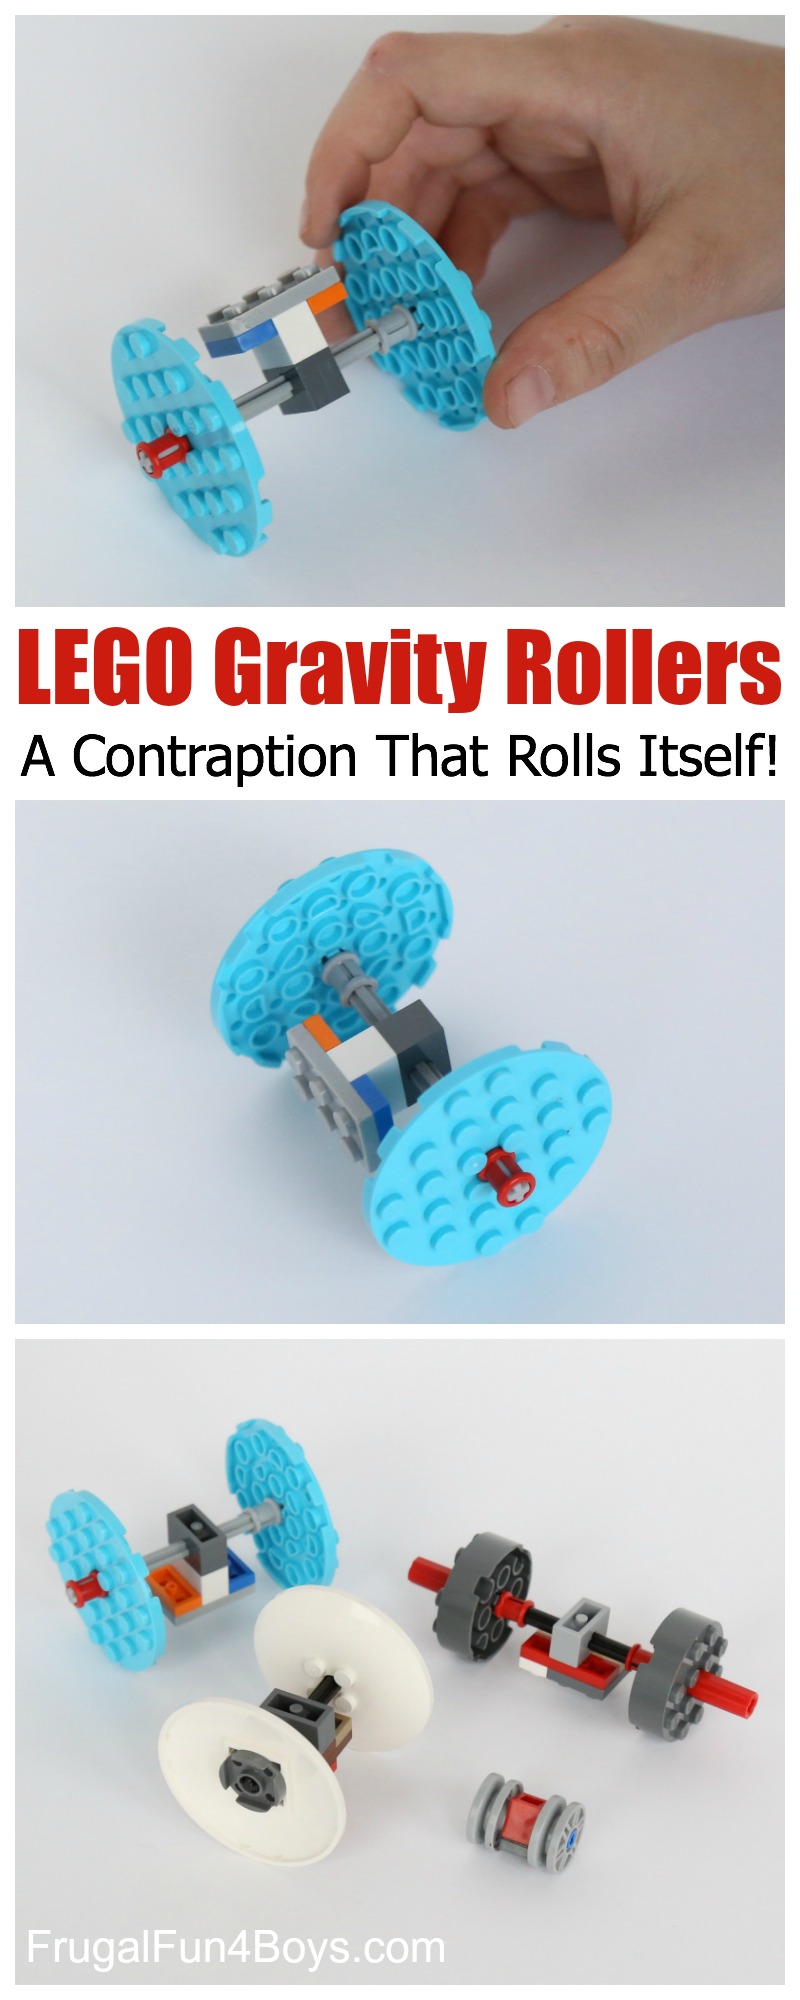 LEGO Gravity Rollers: A Contraption that Rolls Itself!